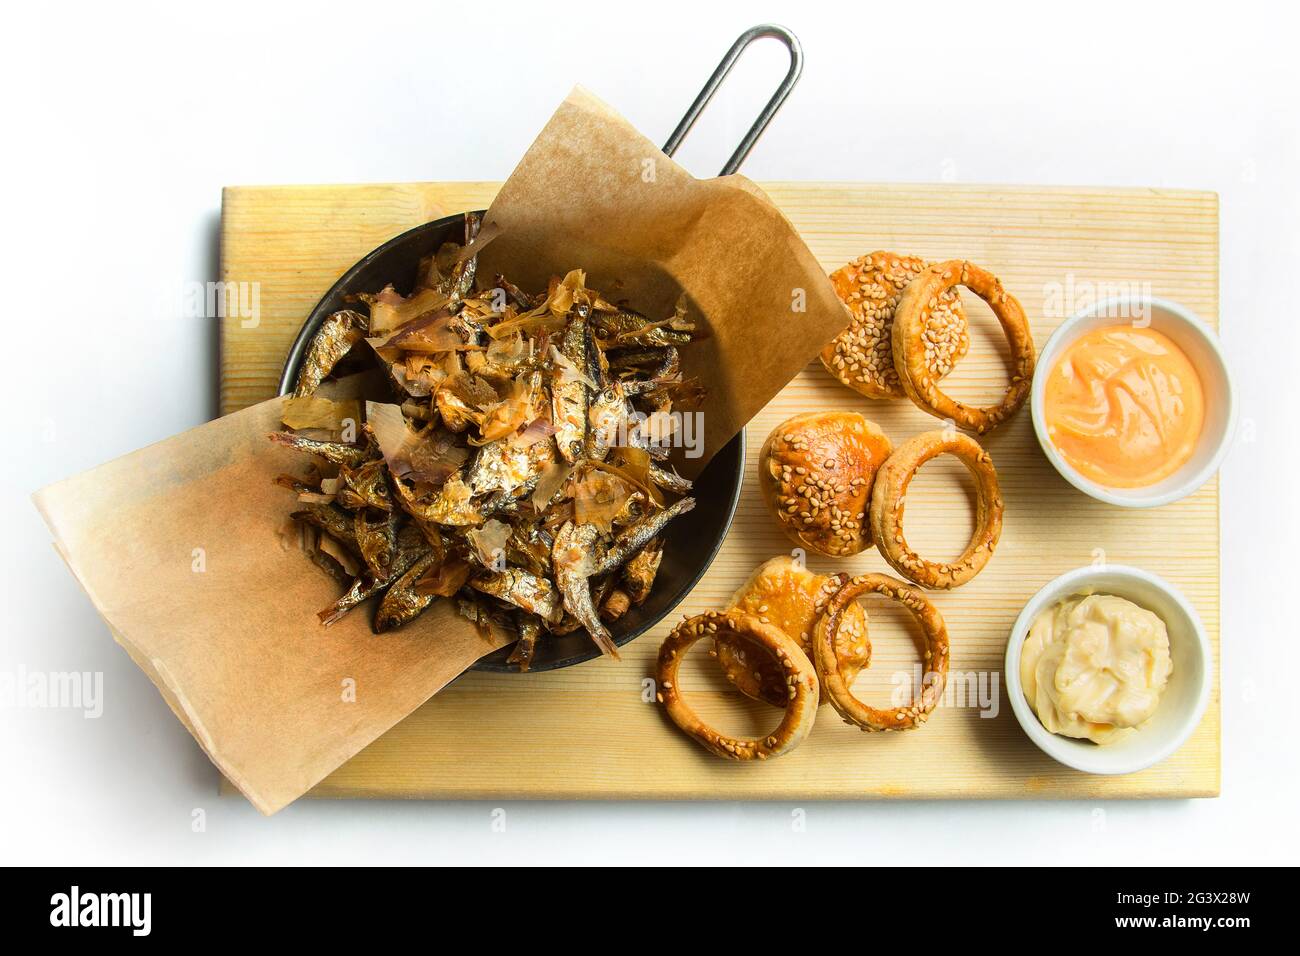 Beer snack: spicy chicken wings, cheese balls, fried black bread toast with garlic, onion rings in batter. Snack on a white back Stock Photo